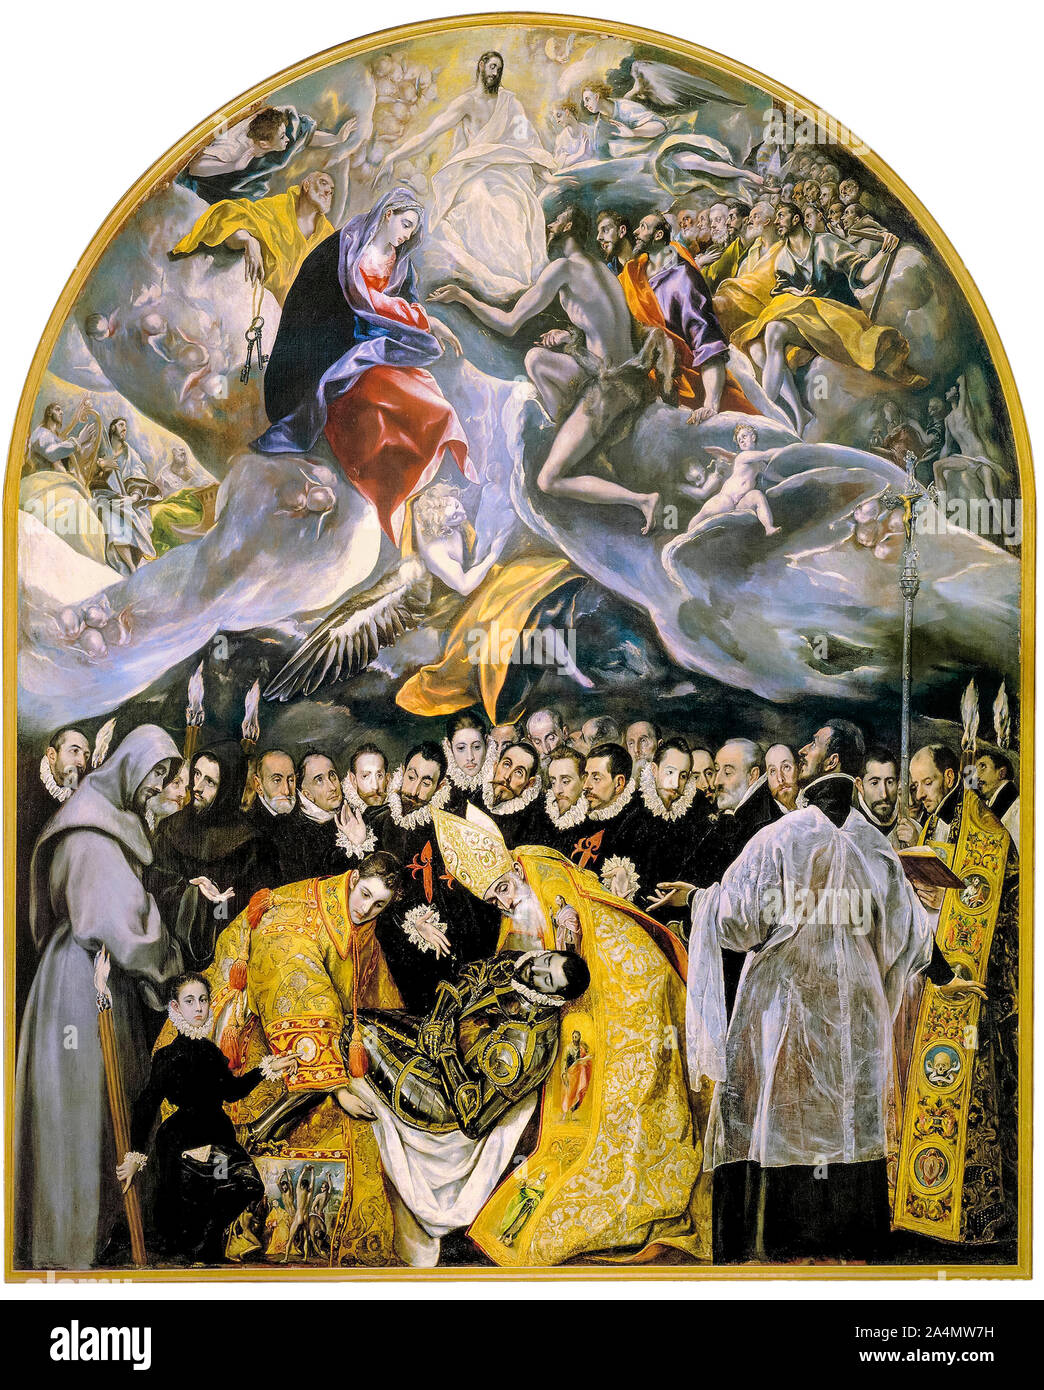 El Greco, The Burial of the Count of Orgaz, painting, 1586-1588 Stock Photo